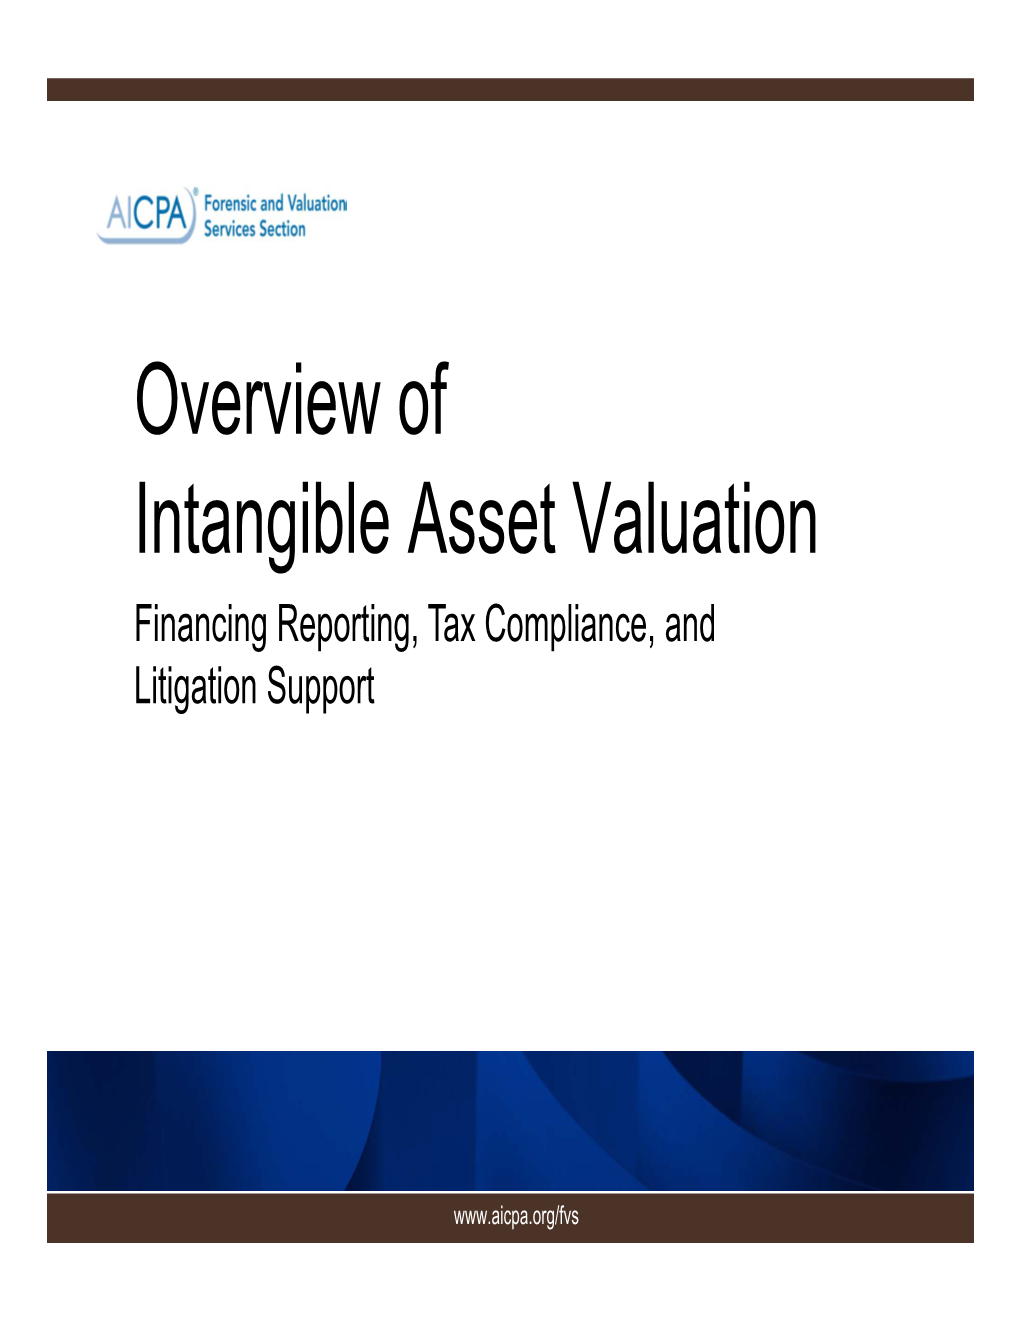 Overview of Intangible Asset Valuation Financing Reporting, Tax Compliance, and Litigation Support